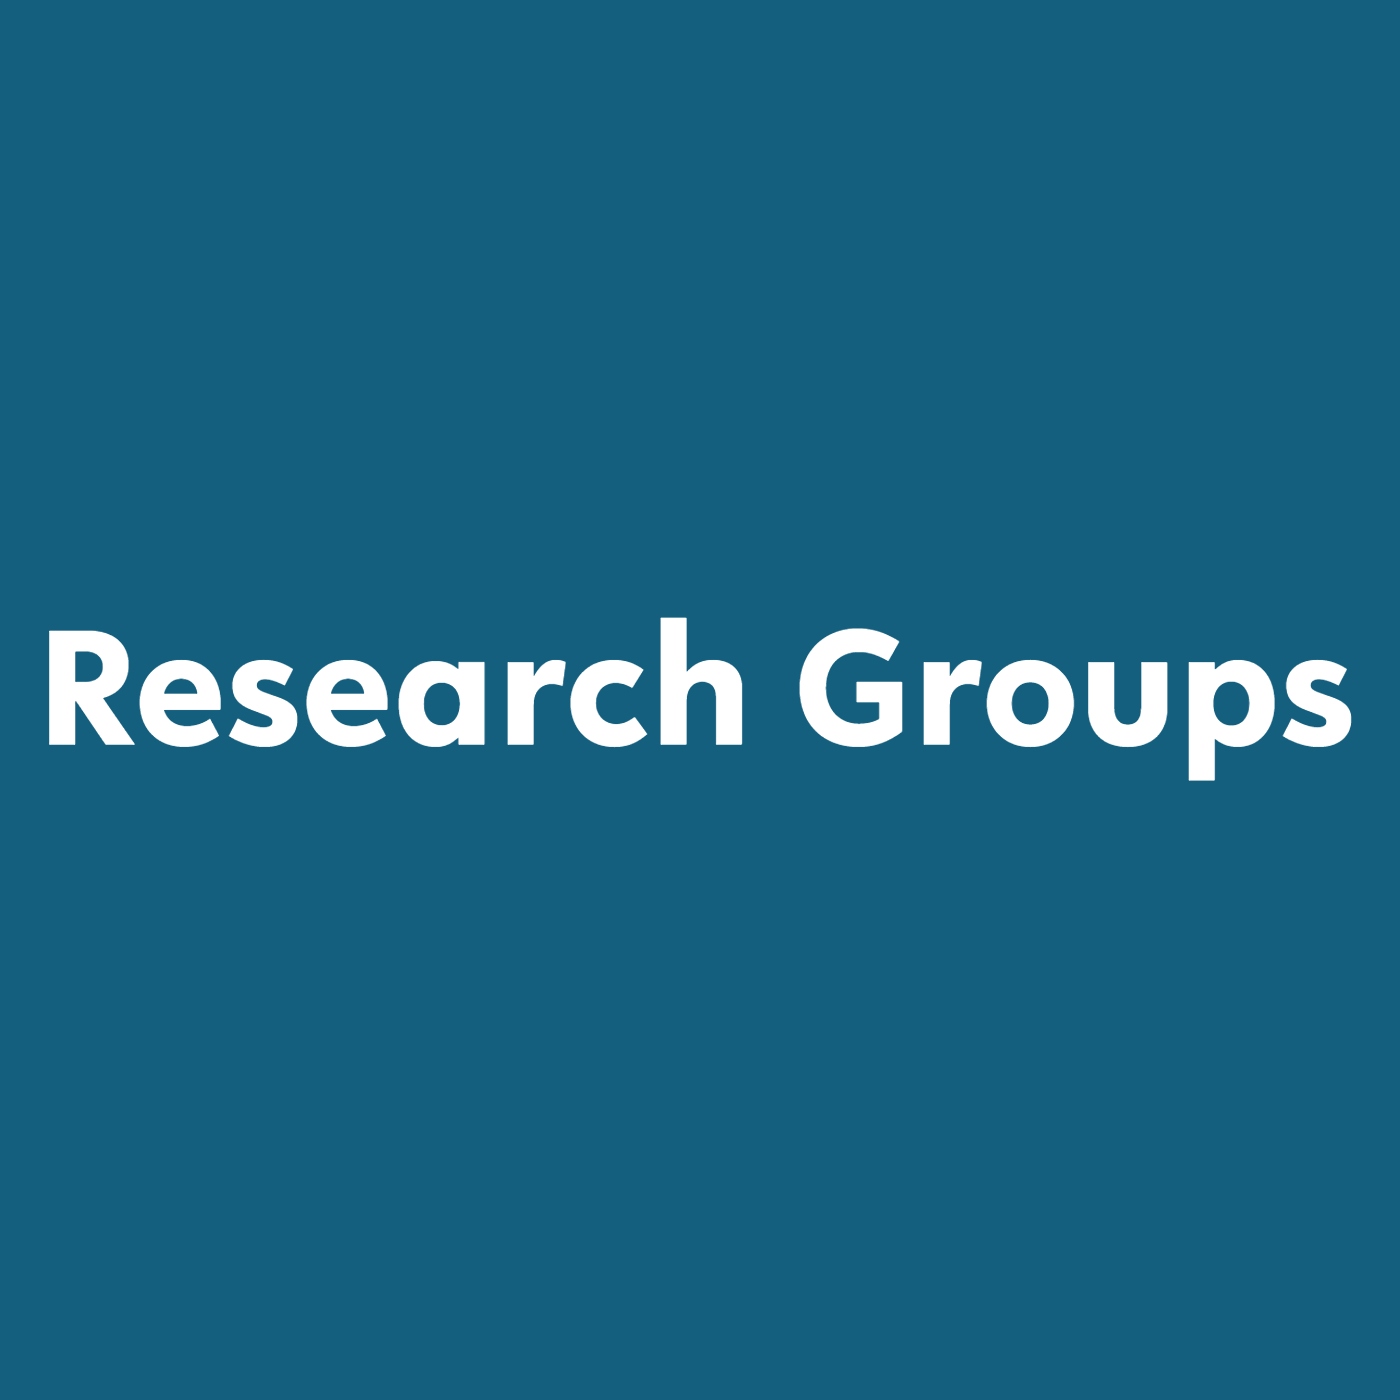 Blue box with text Research Groups